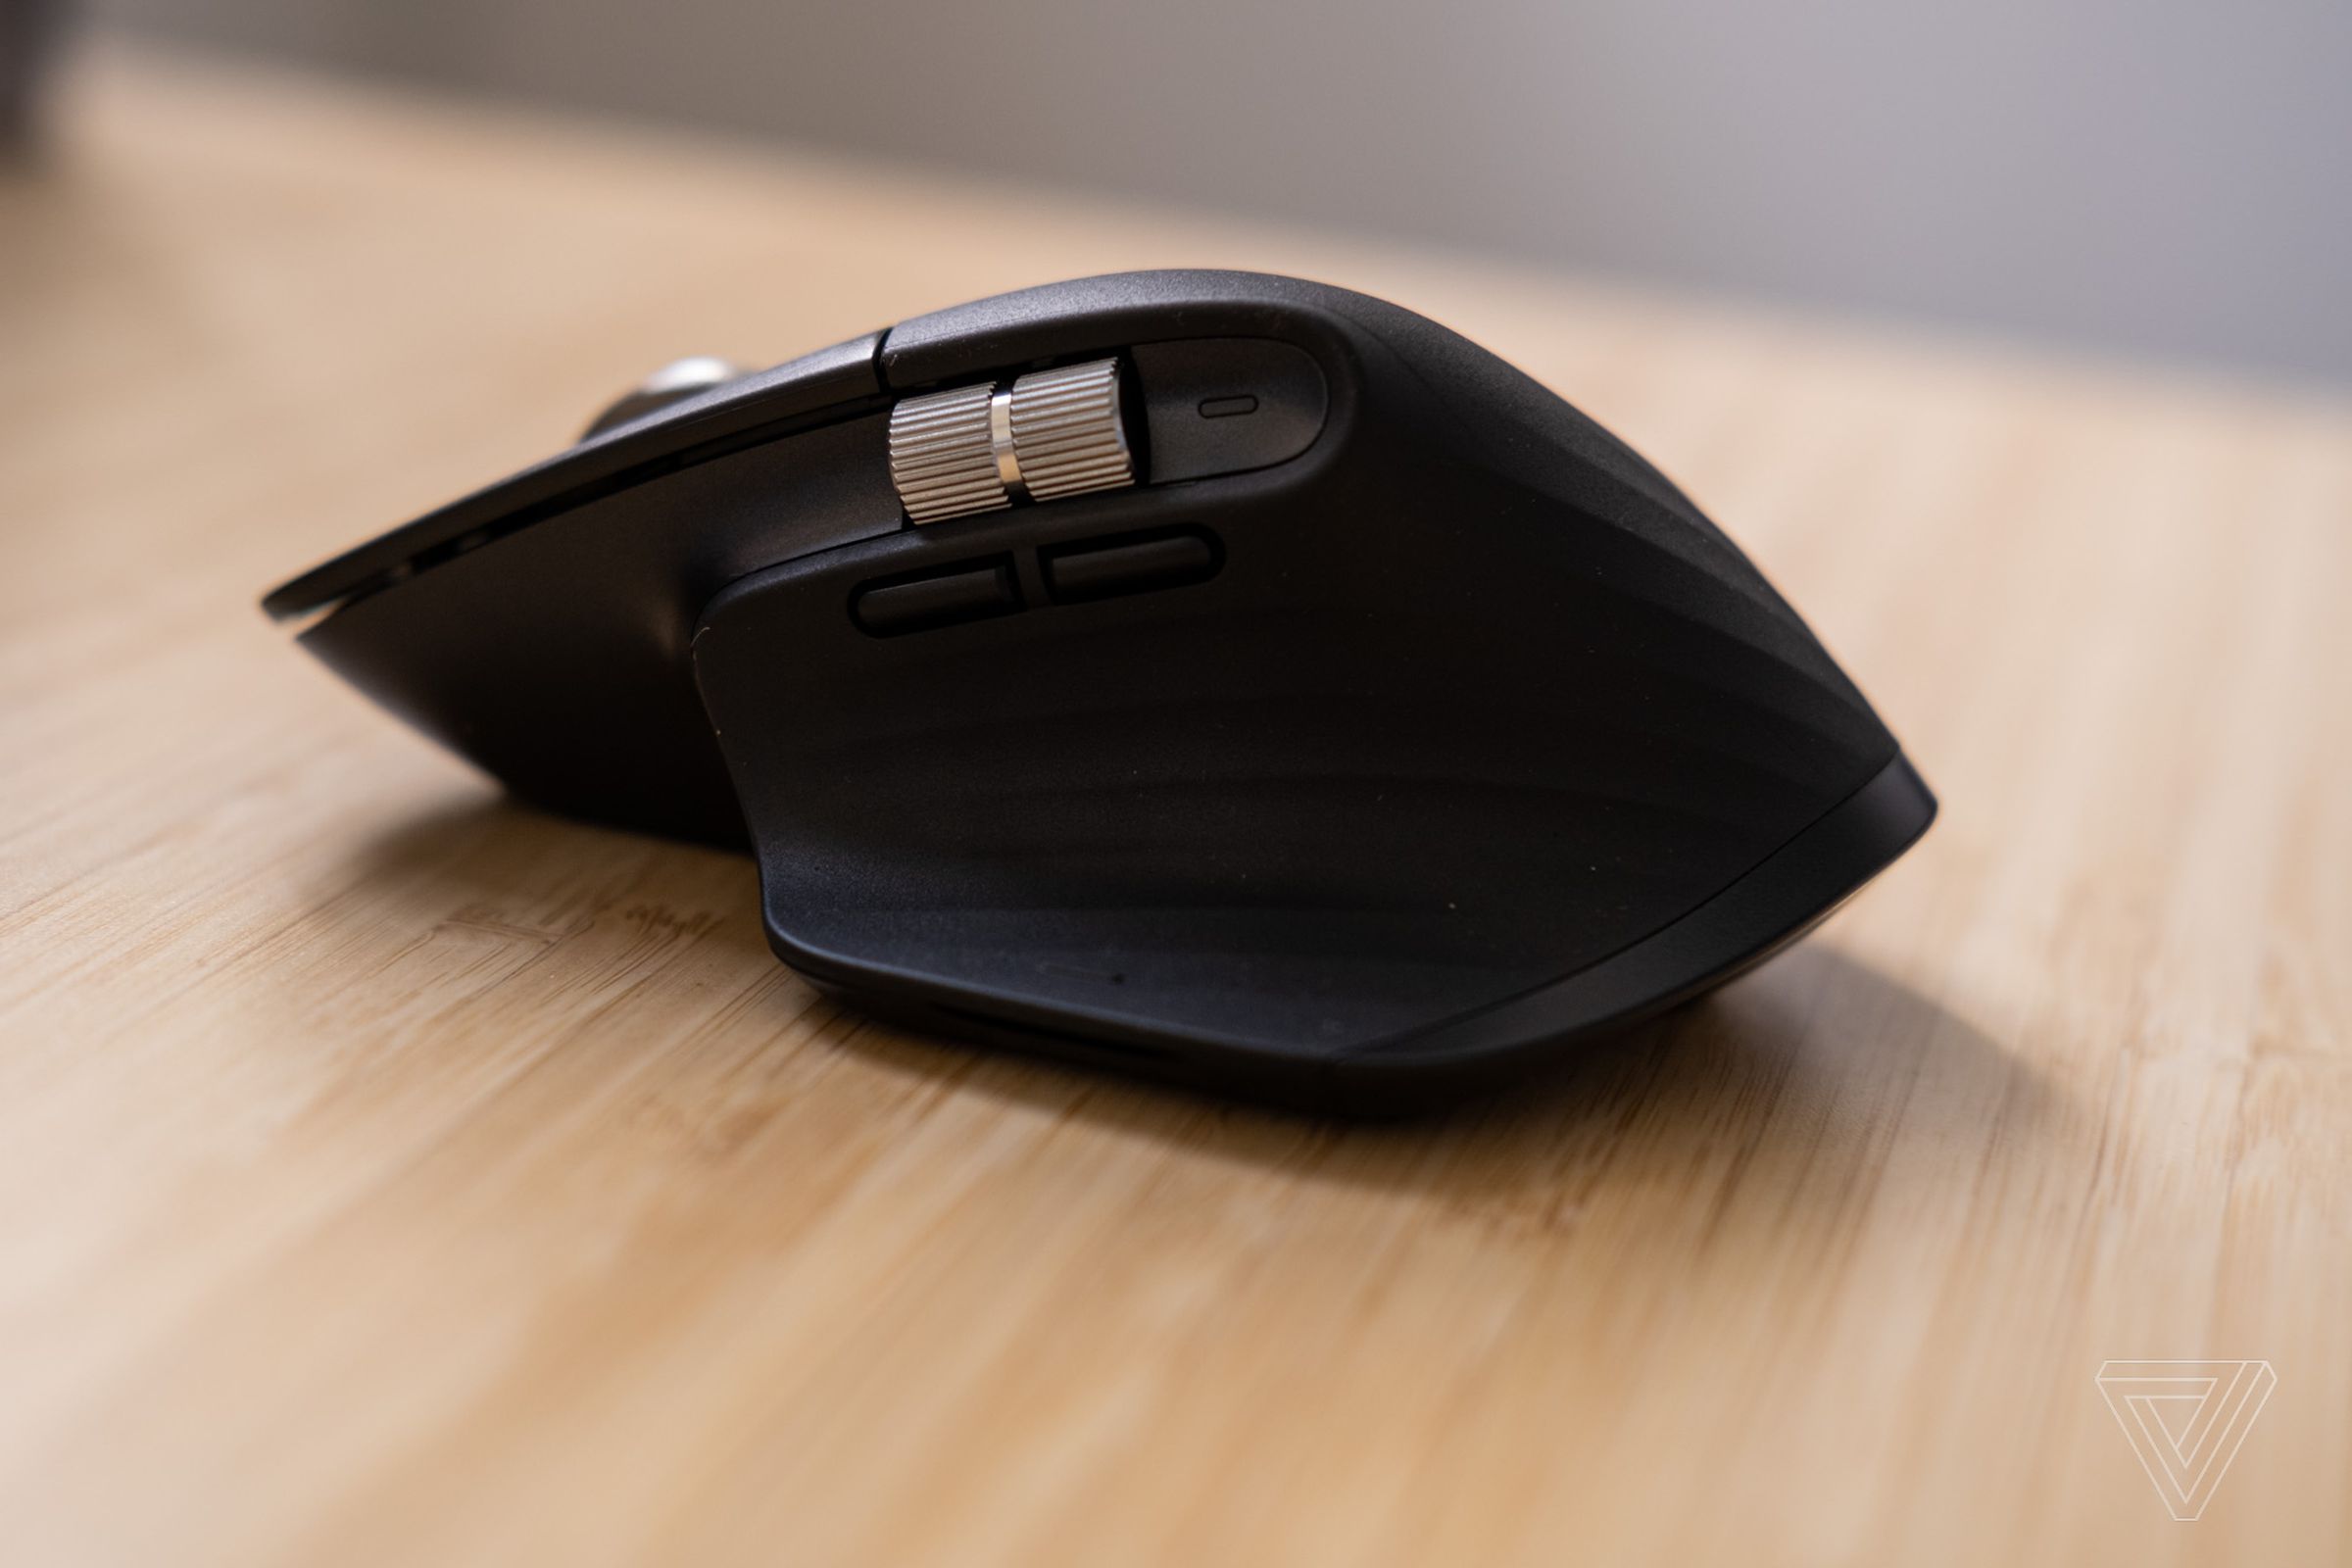 The mouse’s sculpted design is aggressively non-ambidextrous.